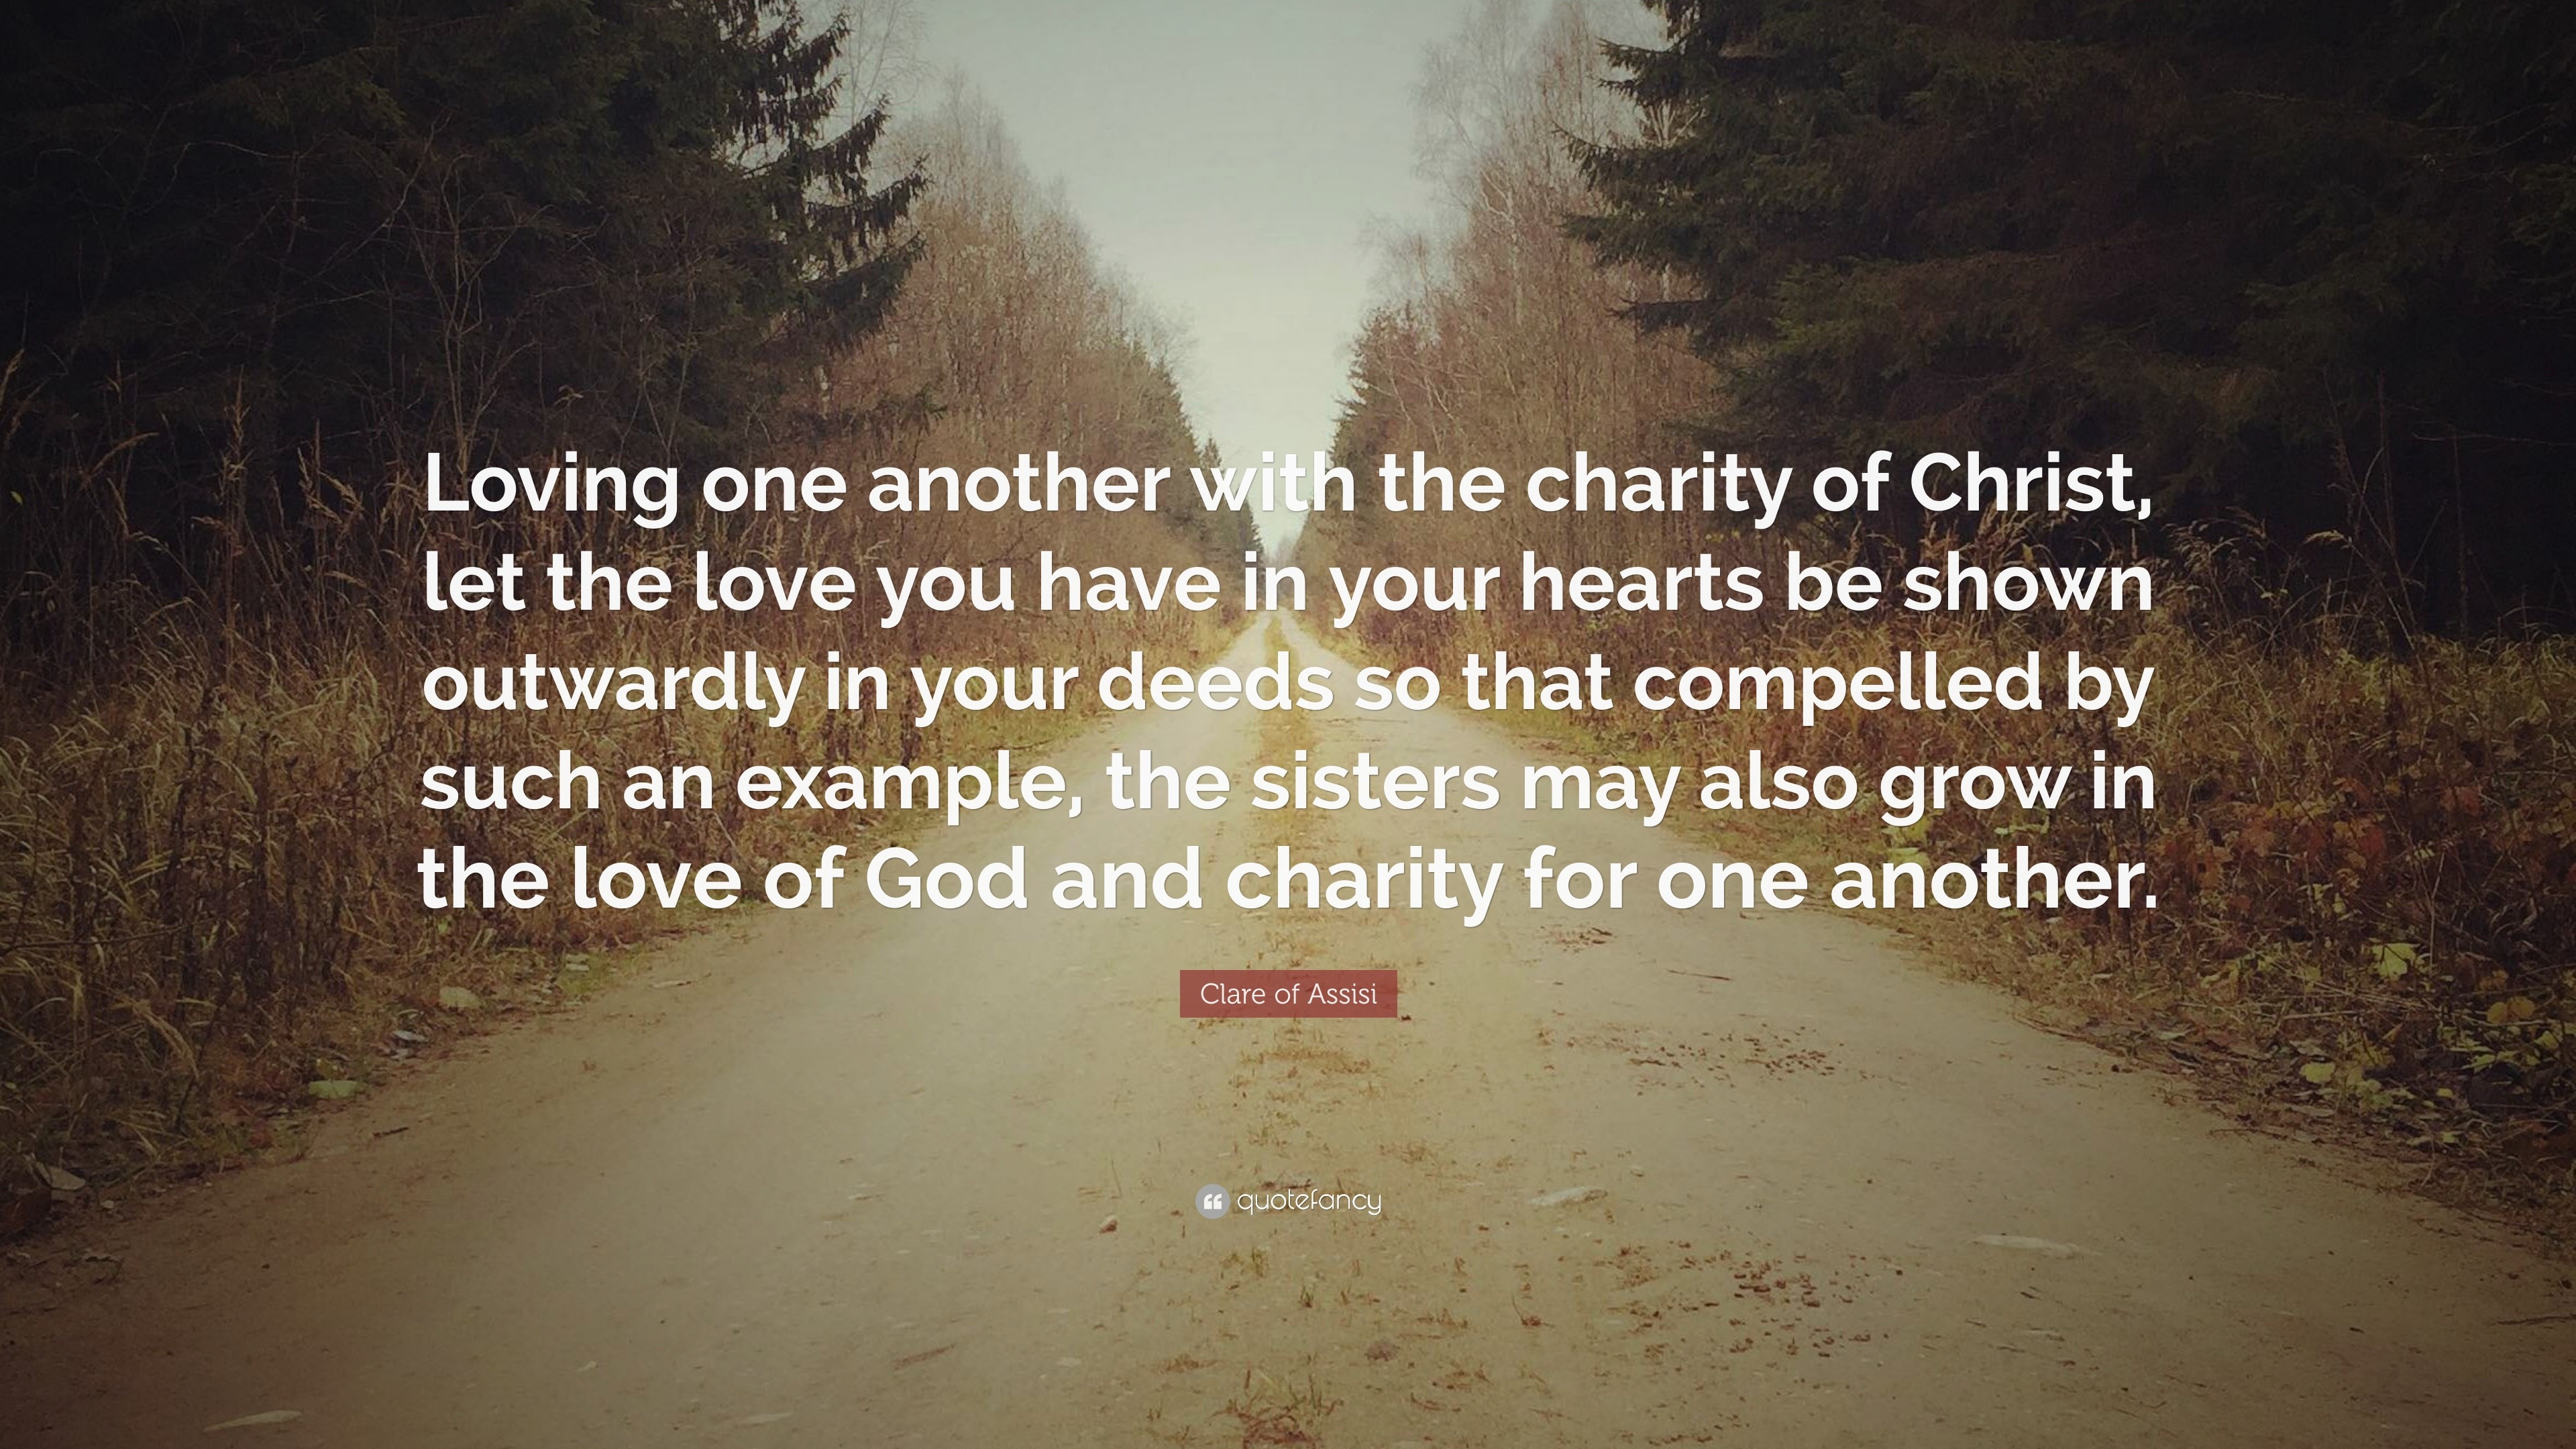 Clare of Assisi Quote “Loving one another with the charity of Christ let